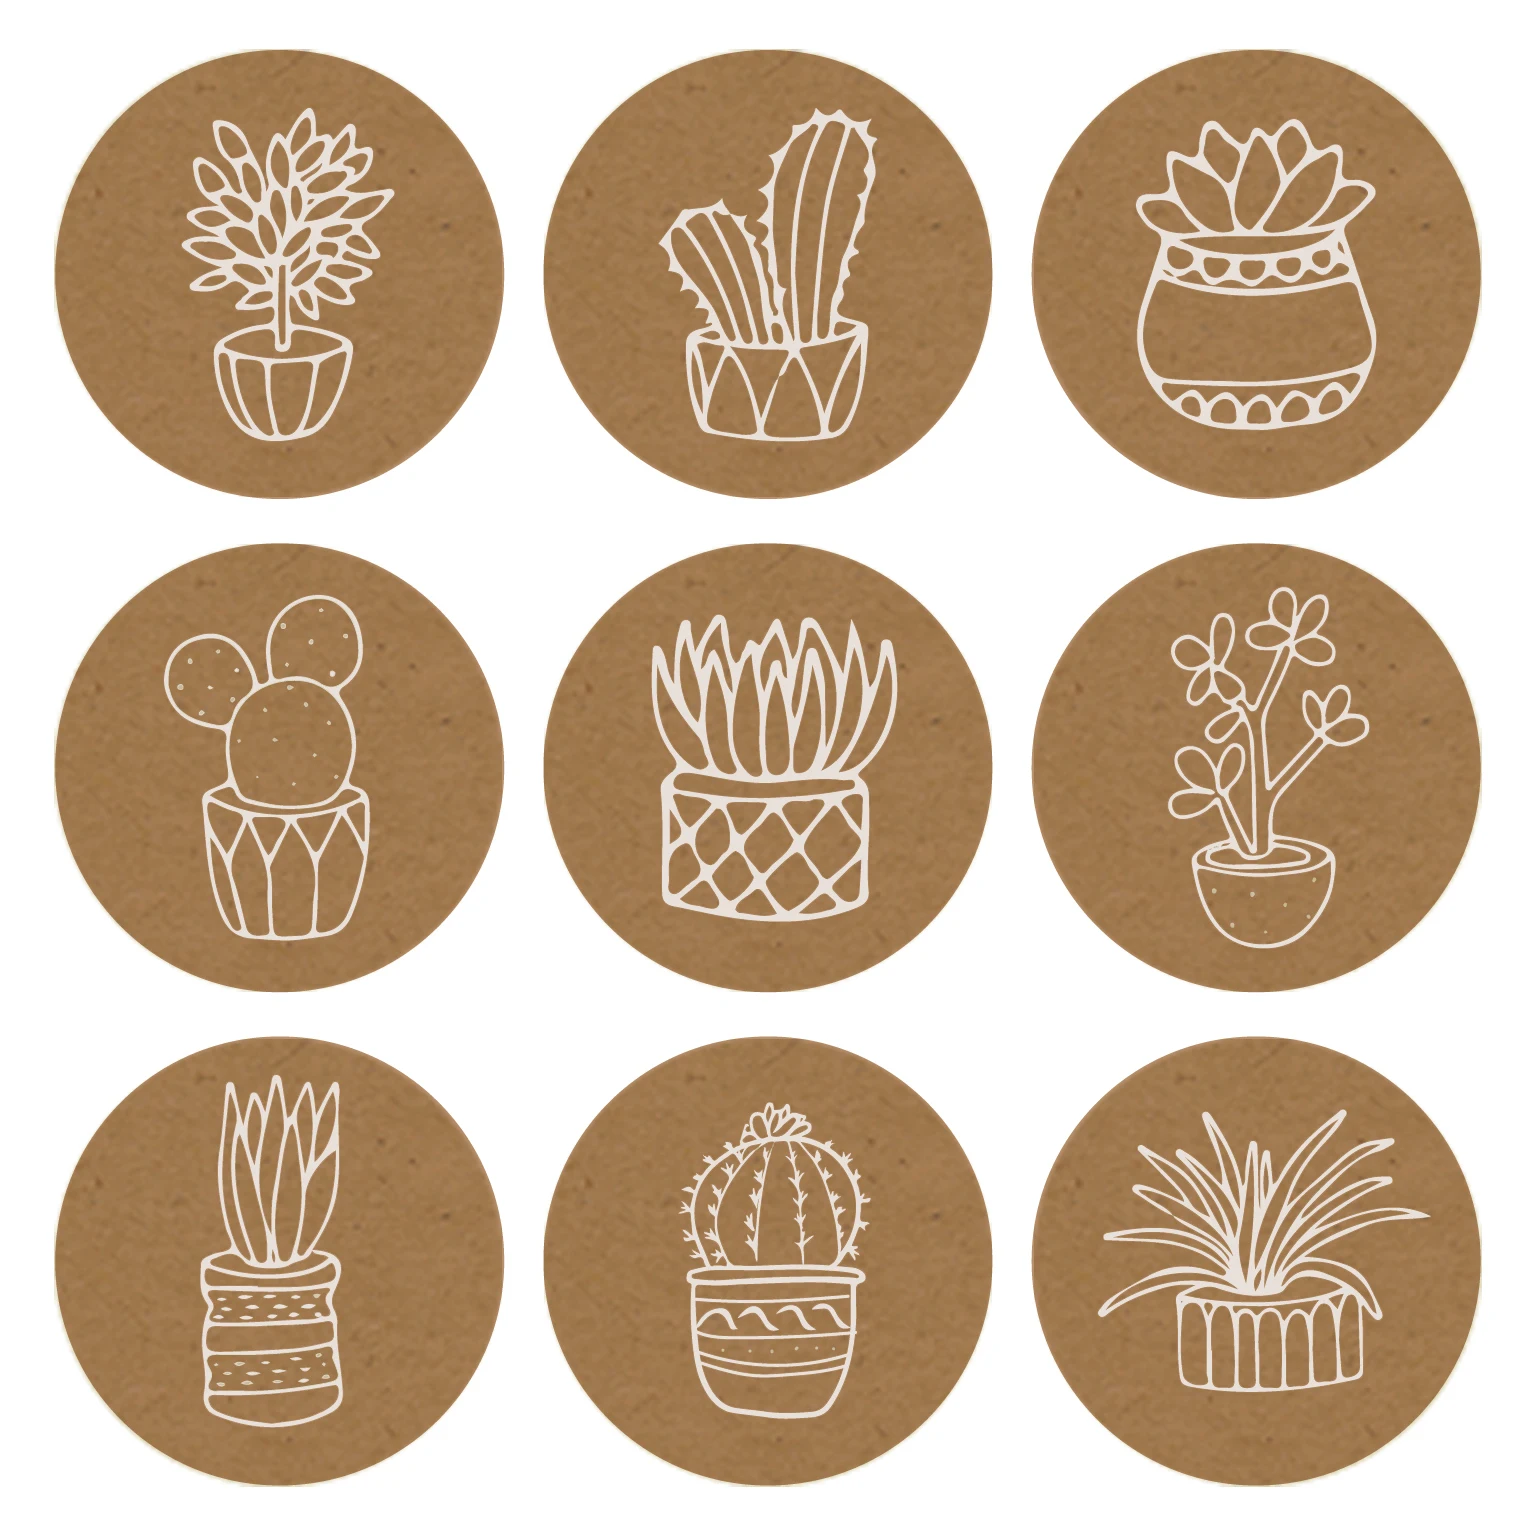 

KK069 180pcs Happy Easter Cactus Stickers Decor Gifts Easter Party Bag Box Tags Self Adhesive Rabbit Egg Label Easter Stickers